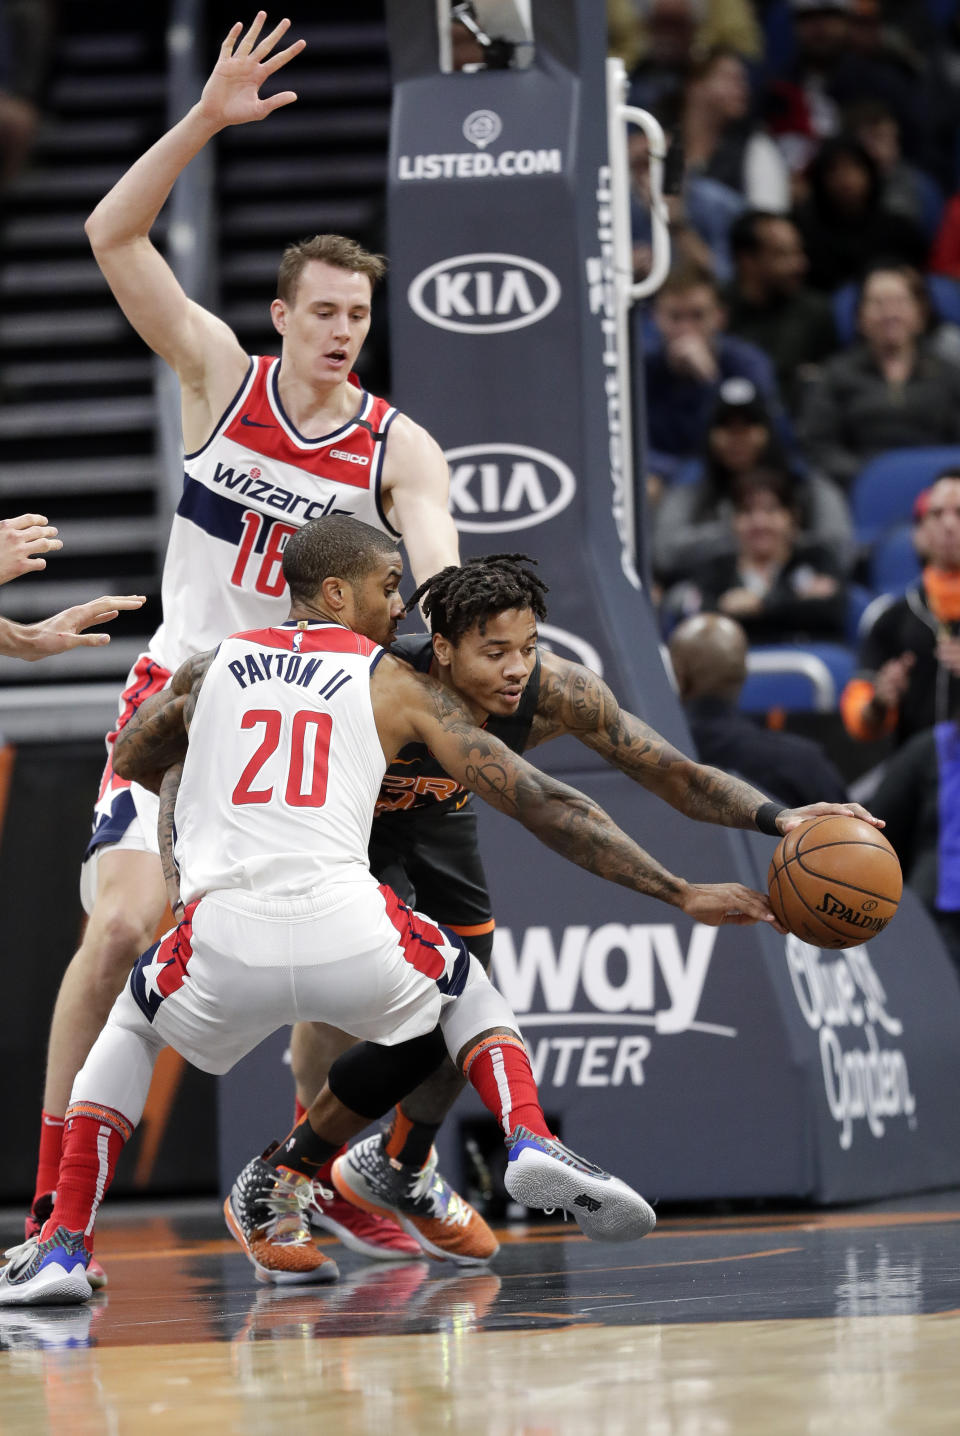 Orlando Magic guard Markelle Fultz, center, goes after a loose ball between Washington Wizards center Anzejs Pasecniks, left, and guard Gary Payton II (20) during the first half of an NBA basketball game Wednesday, Jan. 8, 2020, in Orlando, Fla. (AP Photo/John Raoux)